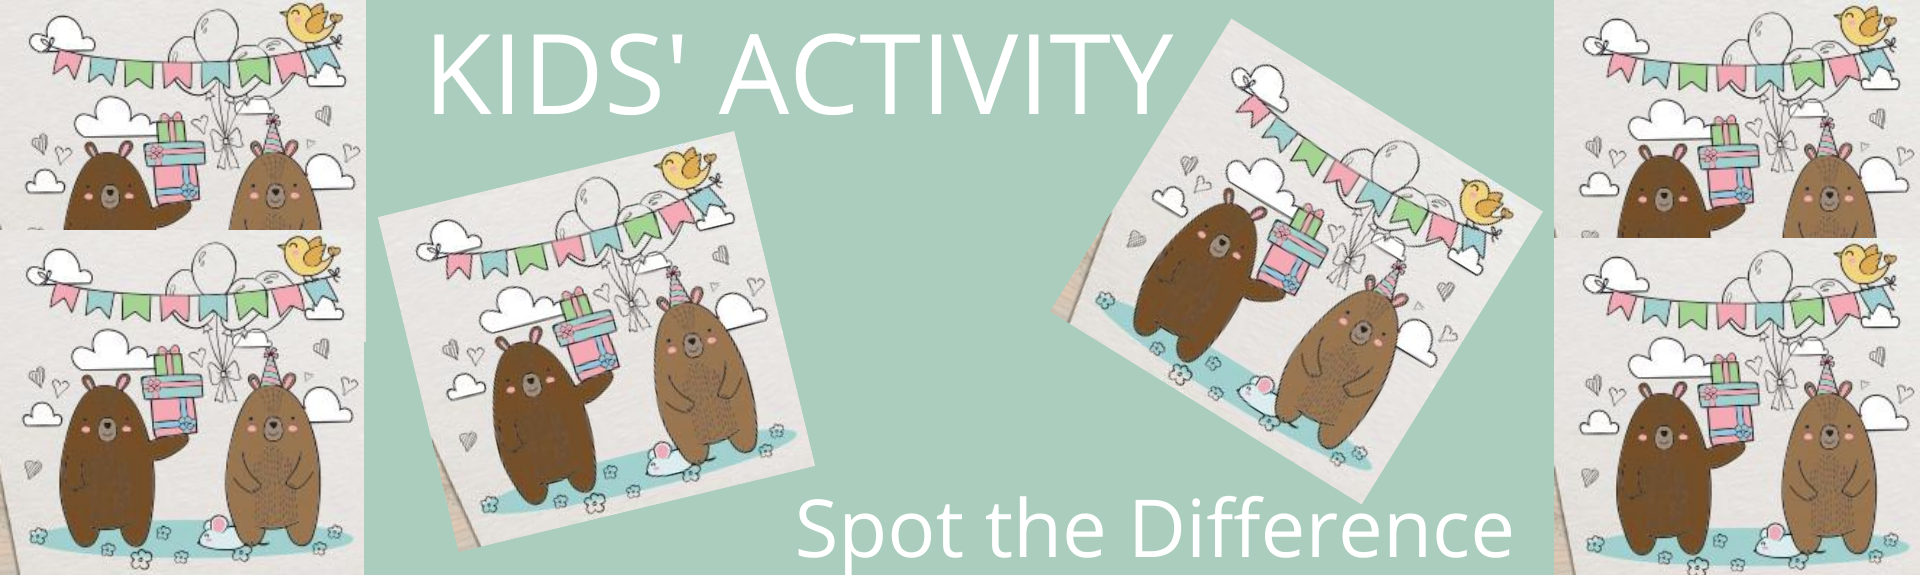 Kids Activity, spot the difference